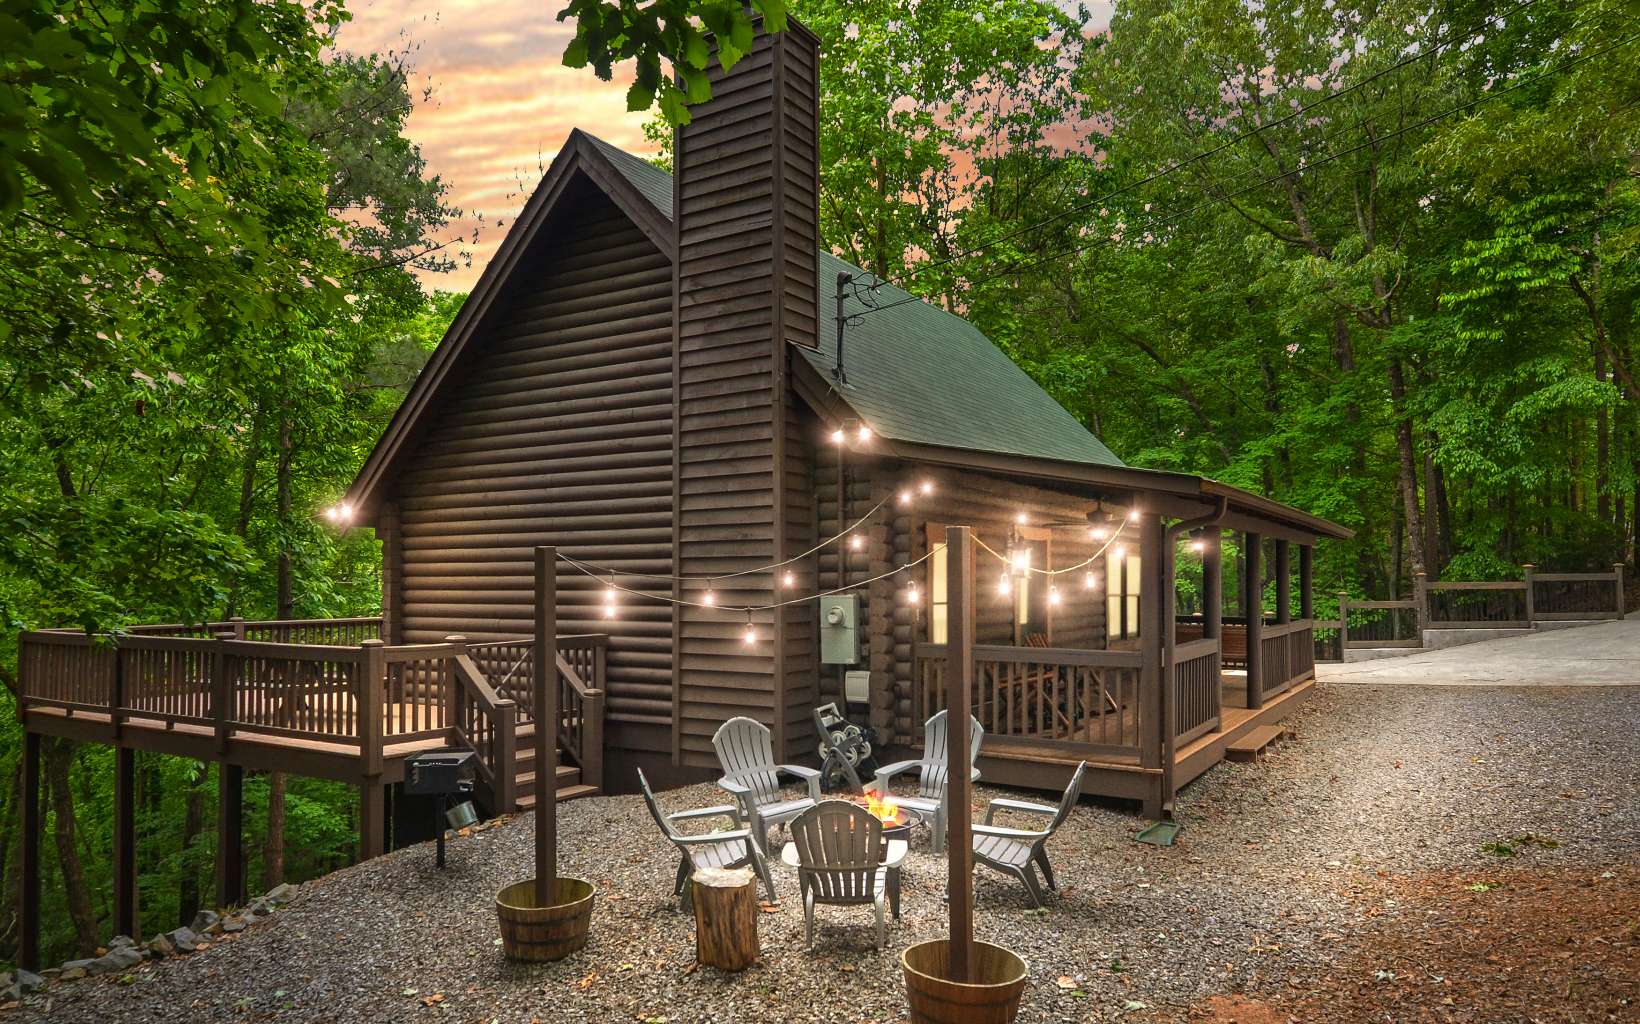 FULLY TURN KEY FULLY FURNISHED REAL LOG CABIN with active short term rental history located in the heart of Ellijay in the highly desired Coosawattee River Resort. This immaculately maintained home is like-brand new! As you enter on the concrete driveway to this lovely 4 BED/3 BATH cabin with real hardwood floors throughout the main level, find yourself in awe of the open concept this cabin has to offer. Relax in the living room on the cozy couches by the stacked stone real wood fireplace or wander into the open concept kitchen with custom wood cabinets and stainless steel appliances! Master conveniently located on the main level with hardwood floors and an extra guest room on the main floor. Wander upstairs to find an additional bedroom with hardwood floors and additional full bathroom. Next, continue down to the full basement for another bedroom and full bathroom and ample space for a movie room, game room or perfect hangout spot. Walk outside to feel instant peace and tranquility at this home with the woods surrounding the property for privacy so you can't see any other homes, the large back deck with a hot tub, the perfect area for entertaining with the large fire pit and chairs set up already and a whole lot of fun waiting to happen! This would make the perfect full time living, part time living or vacation short term rental. See Rental Projection in links and docs.